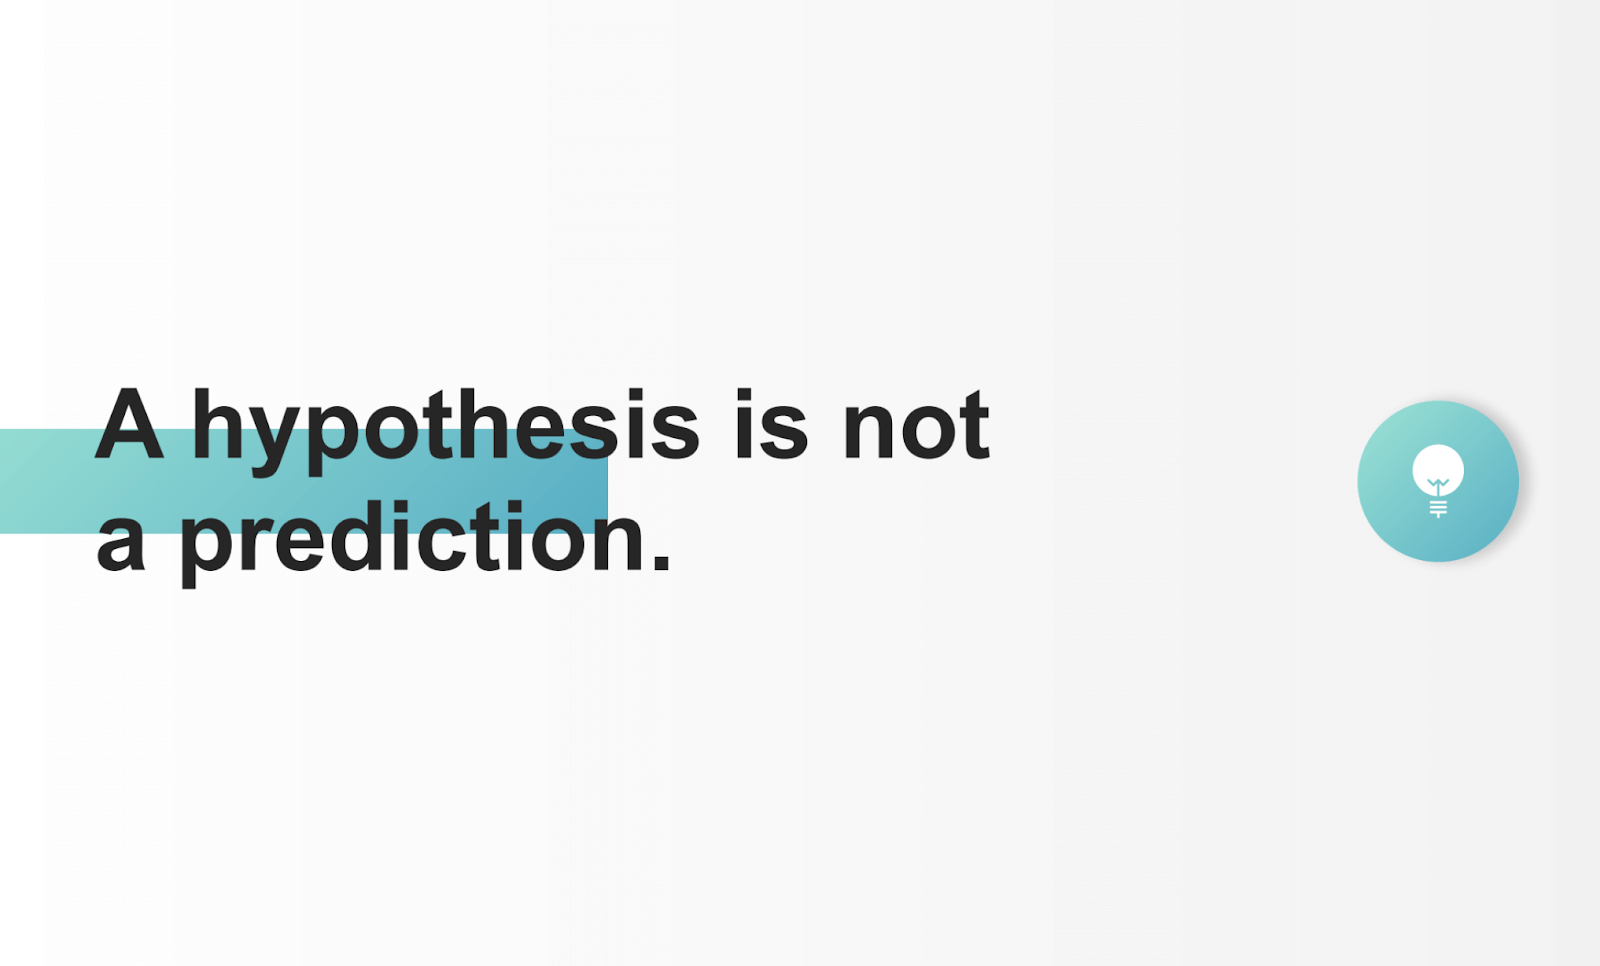 Hypothesis is not a prediction